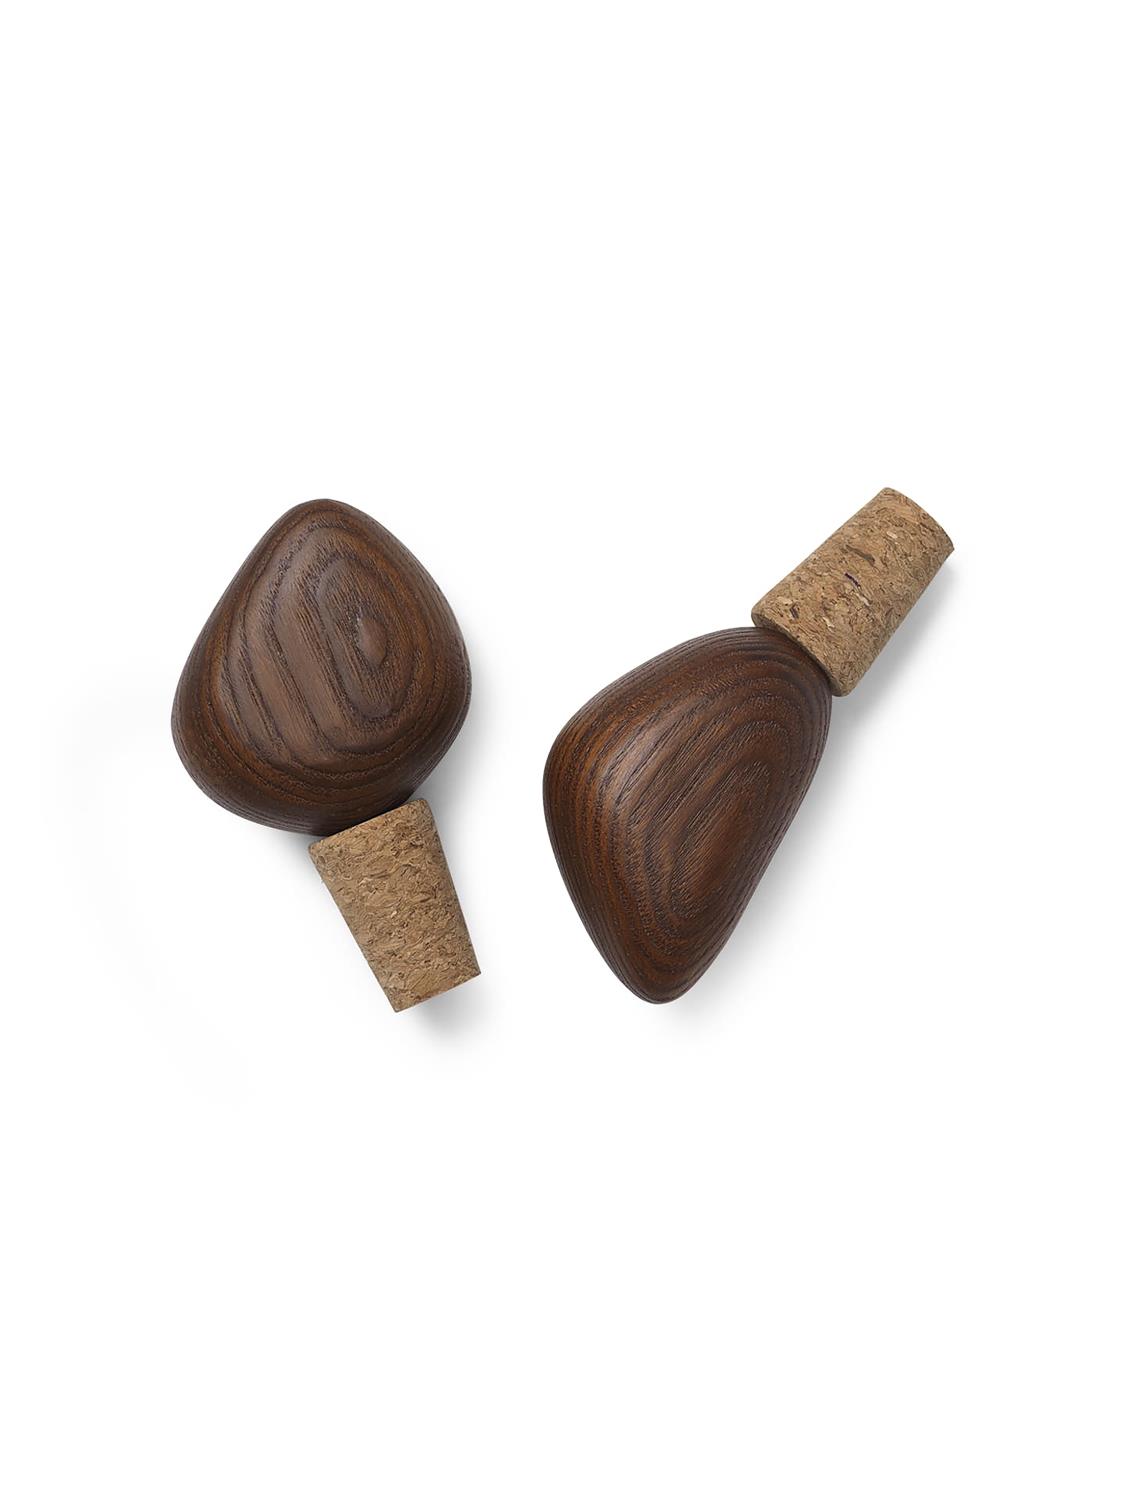 Ferm Living - Cairn Wine Stoppers - Set of 2 - Dark Brown